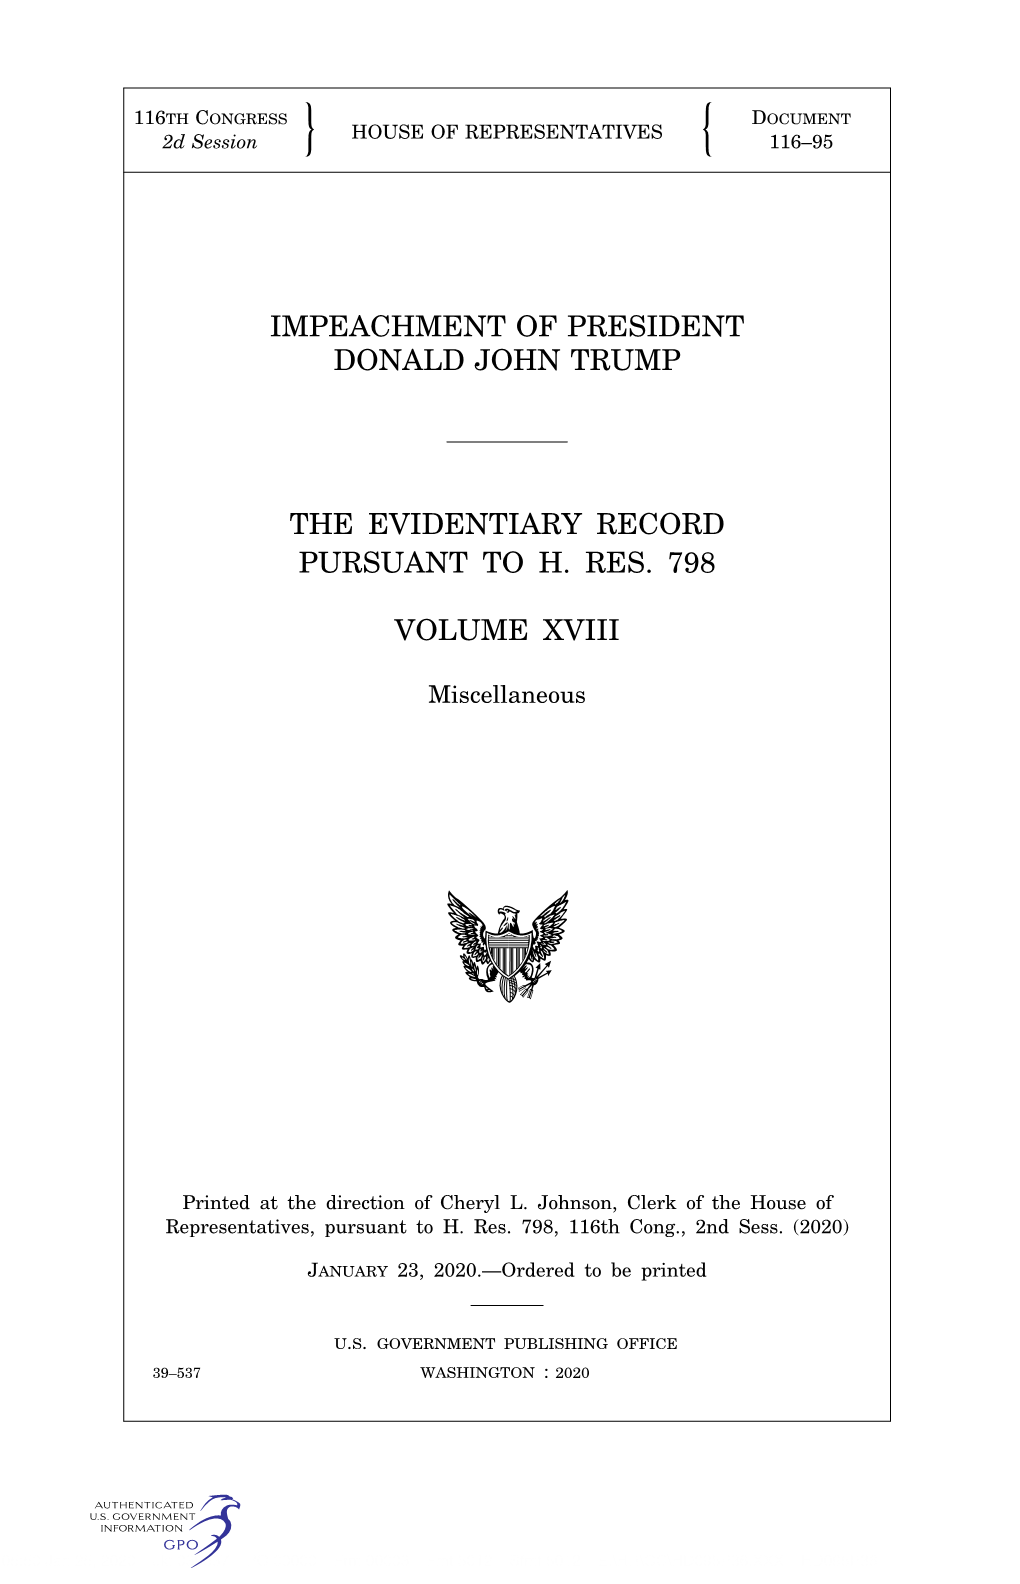 Impeachment of President Donald John Trump the Evidentiary Record Pursuant to H. Res. 798 Volume Xviii